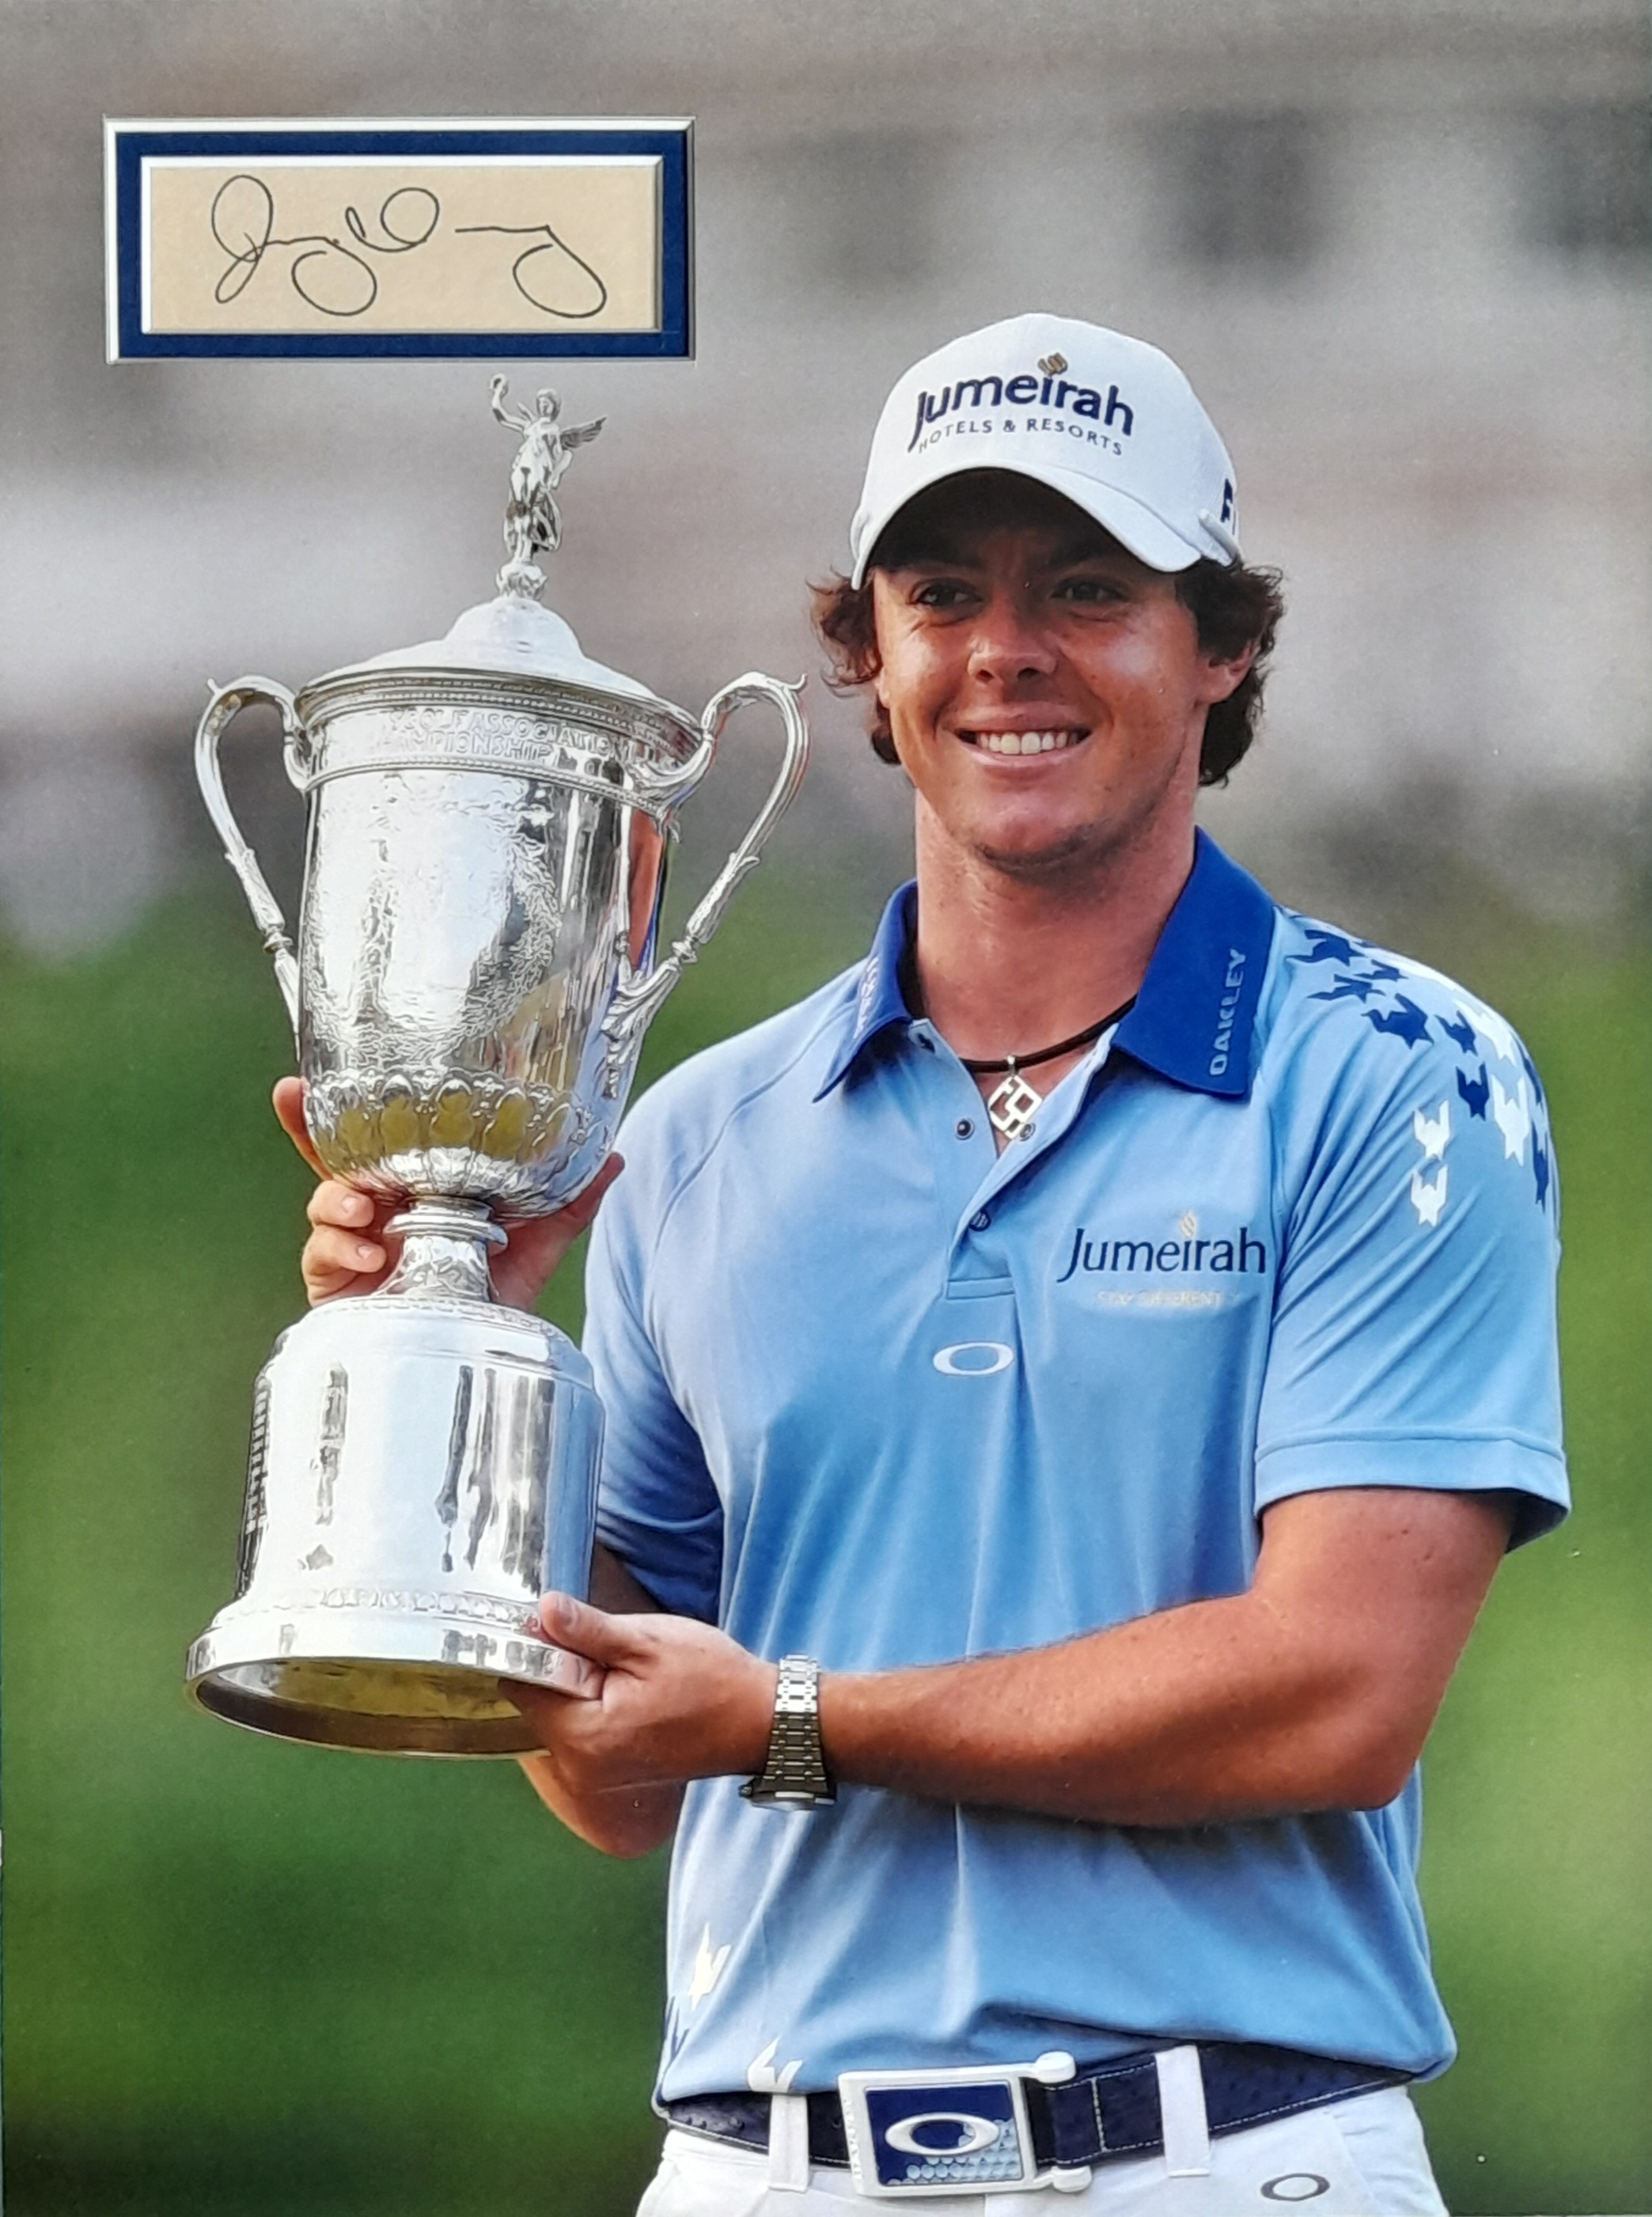 GOLF RORY MCLLROY AUTOGRAPHED DISPLAY